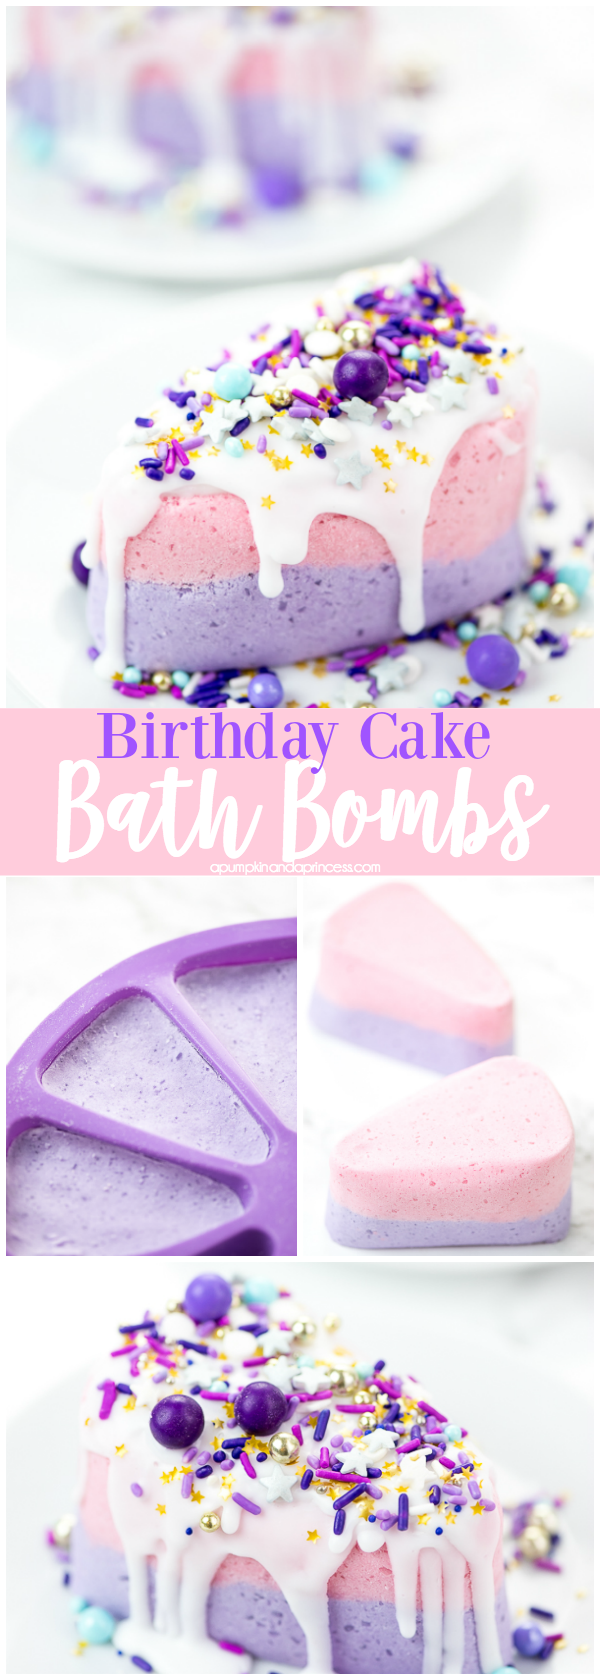 DIY Cake Bath Bomb – how to make birthday cake bath bombs with soap icing and sprinkles.